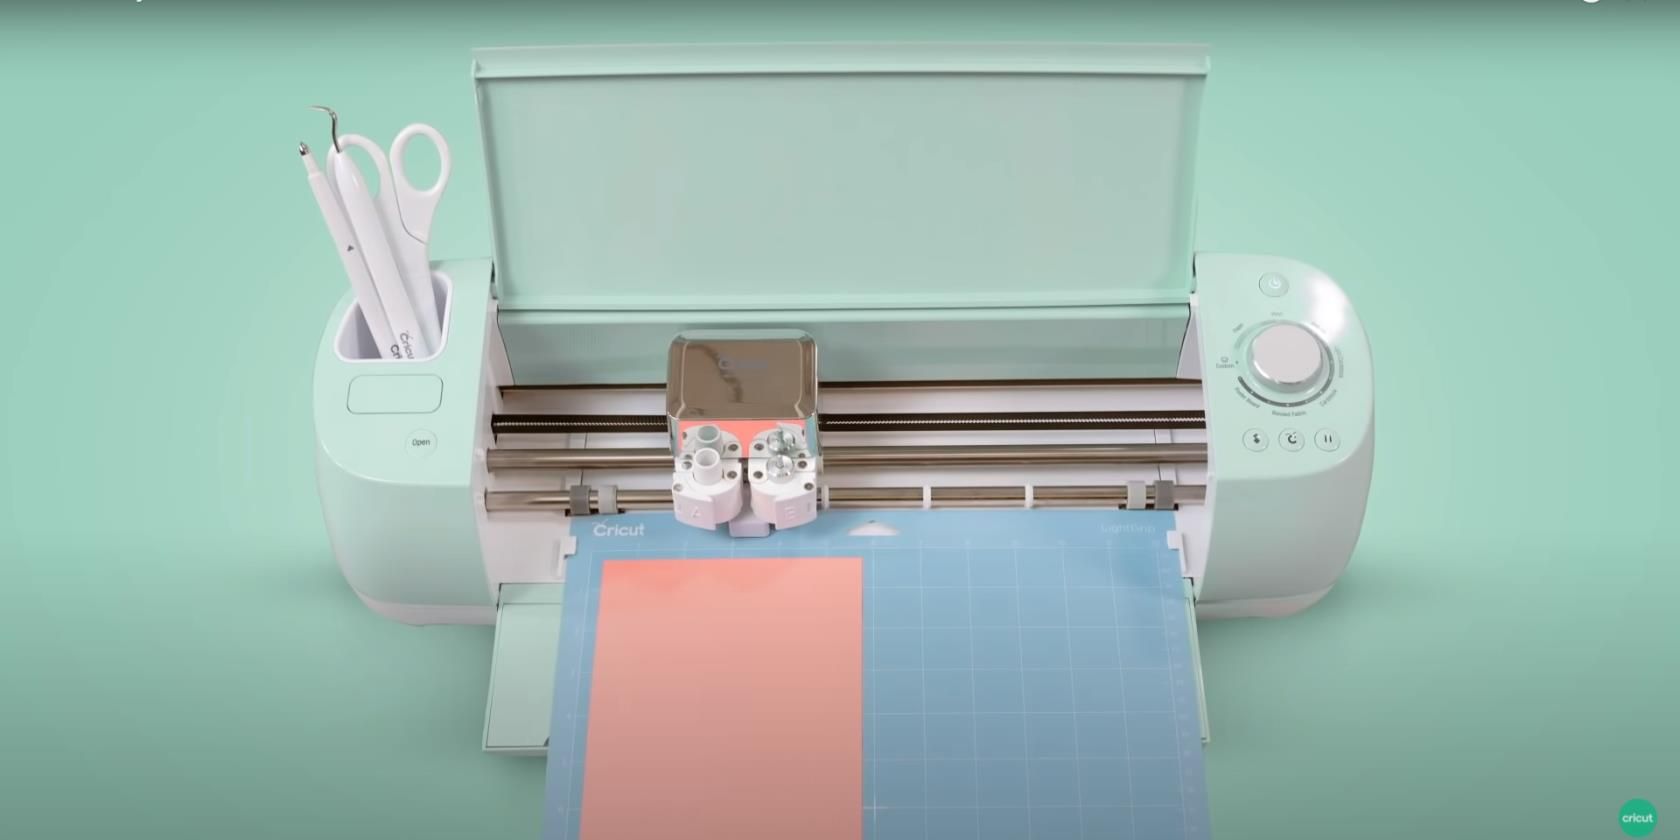 What Is a Cricut Machine and How Does It Work?